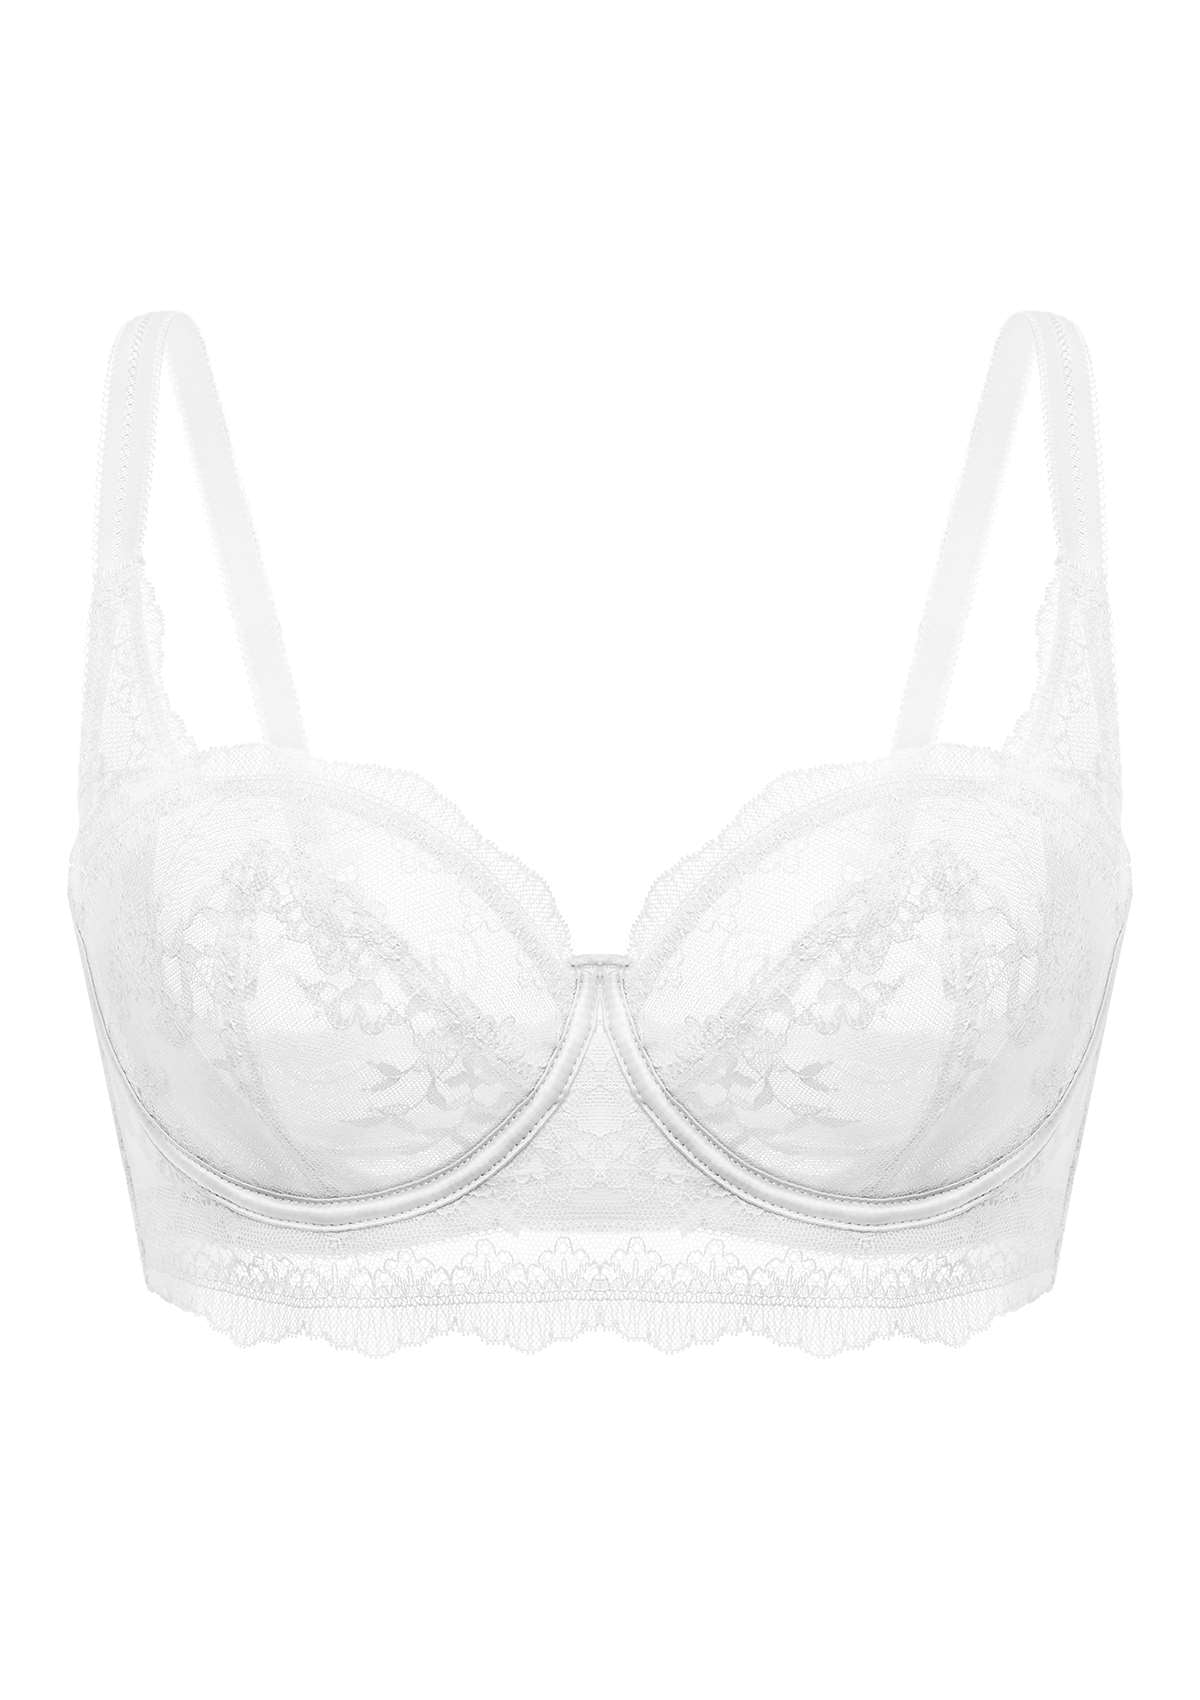 HSIA I Do Floral Lace Bridal Balconette Beautiful Bra For Special Day - Pink / 34 / D